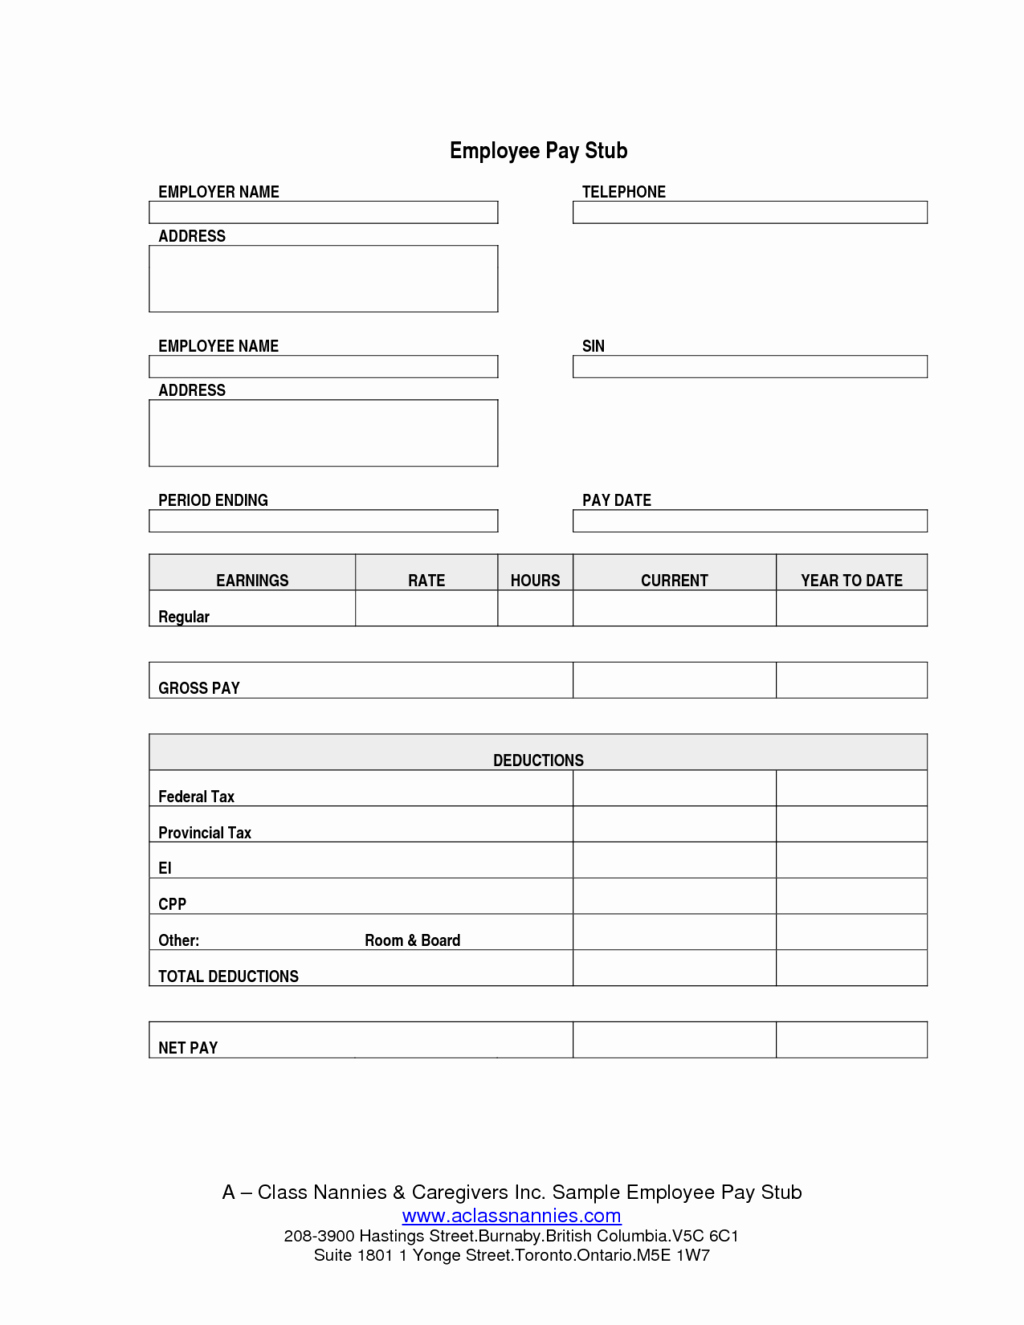 Employee Pay Stub Template Free New Excel Payroll Template Editable Payroll Worksheet